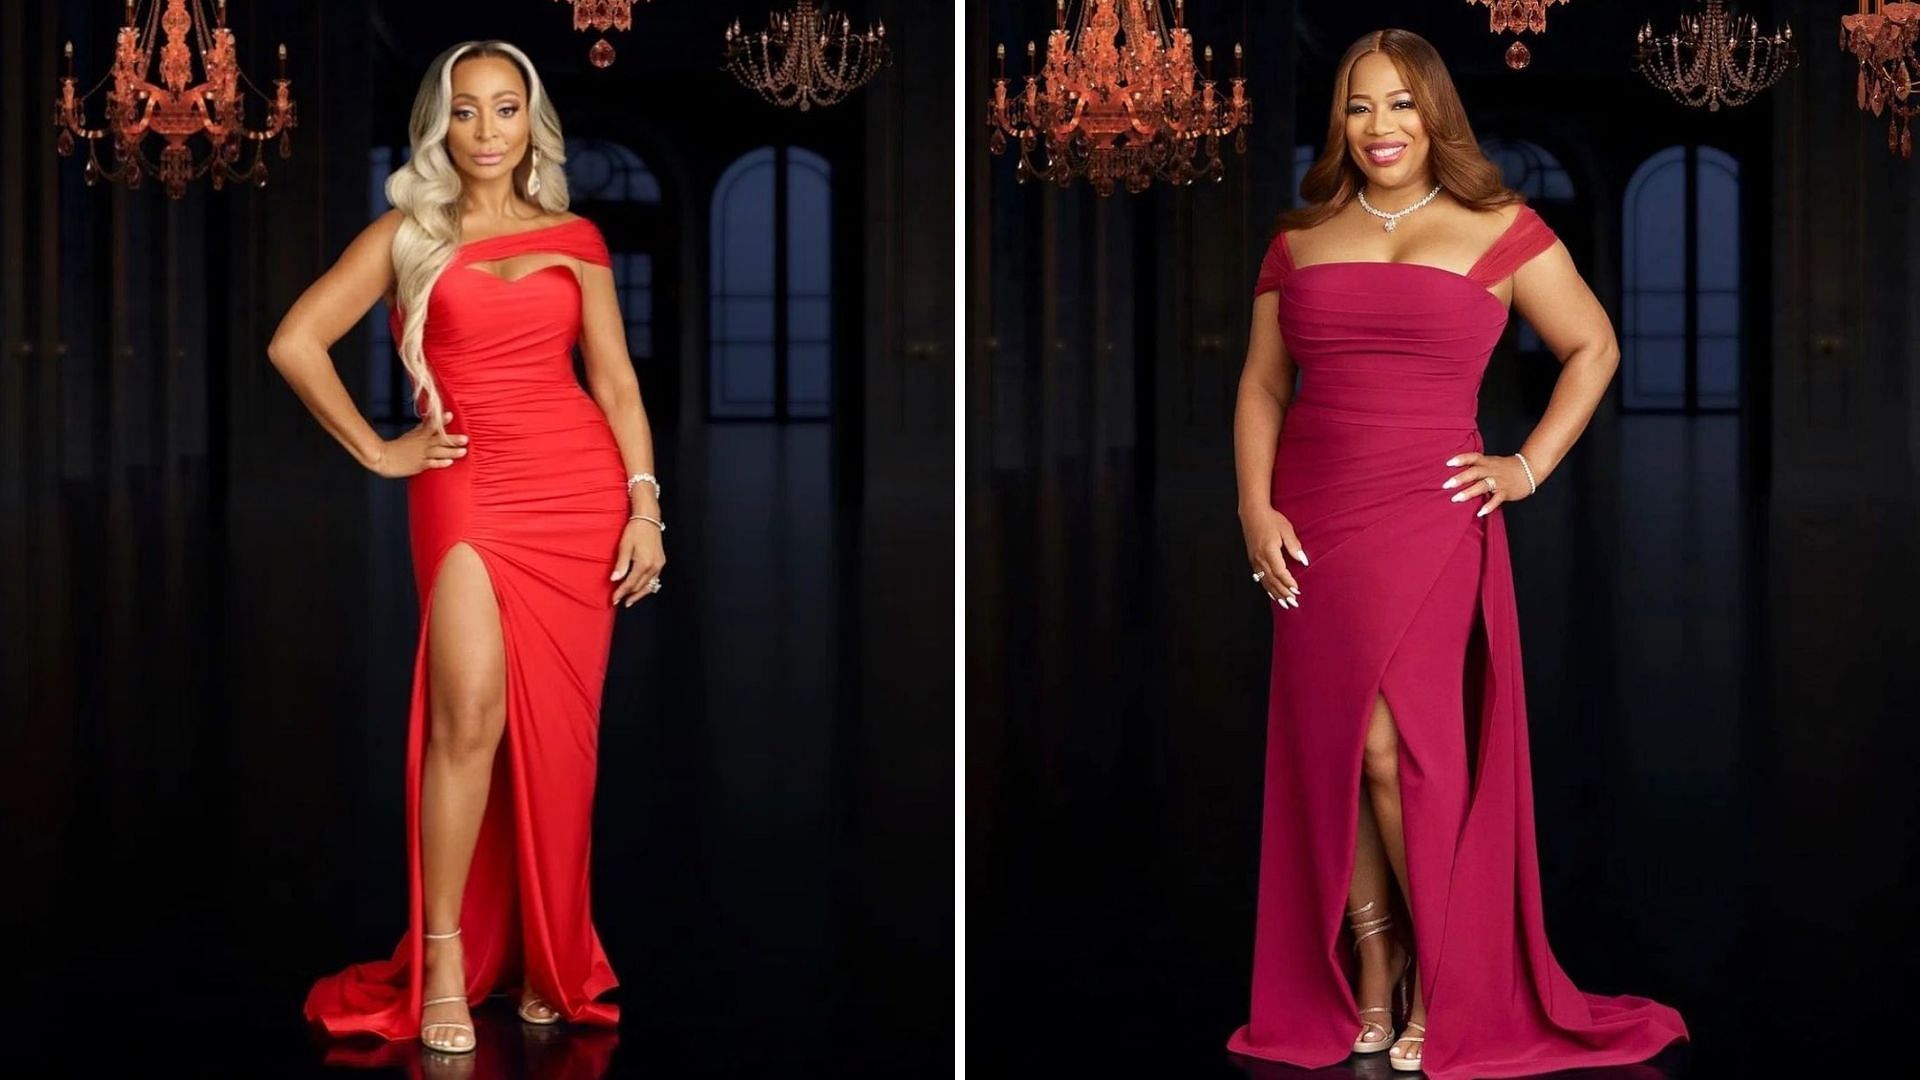 Karen and Charrisse hash out their differences on RHOP